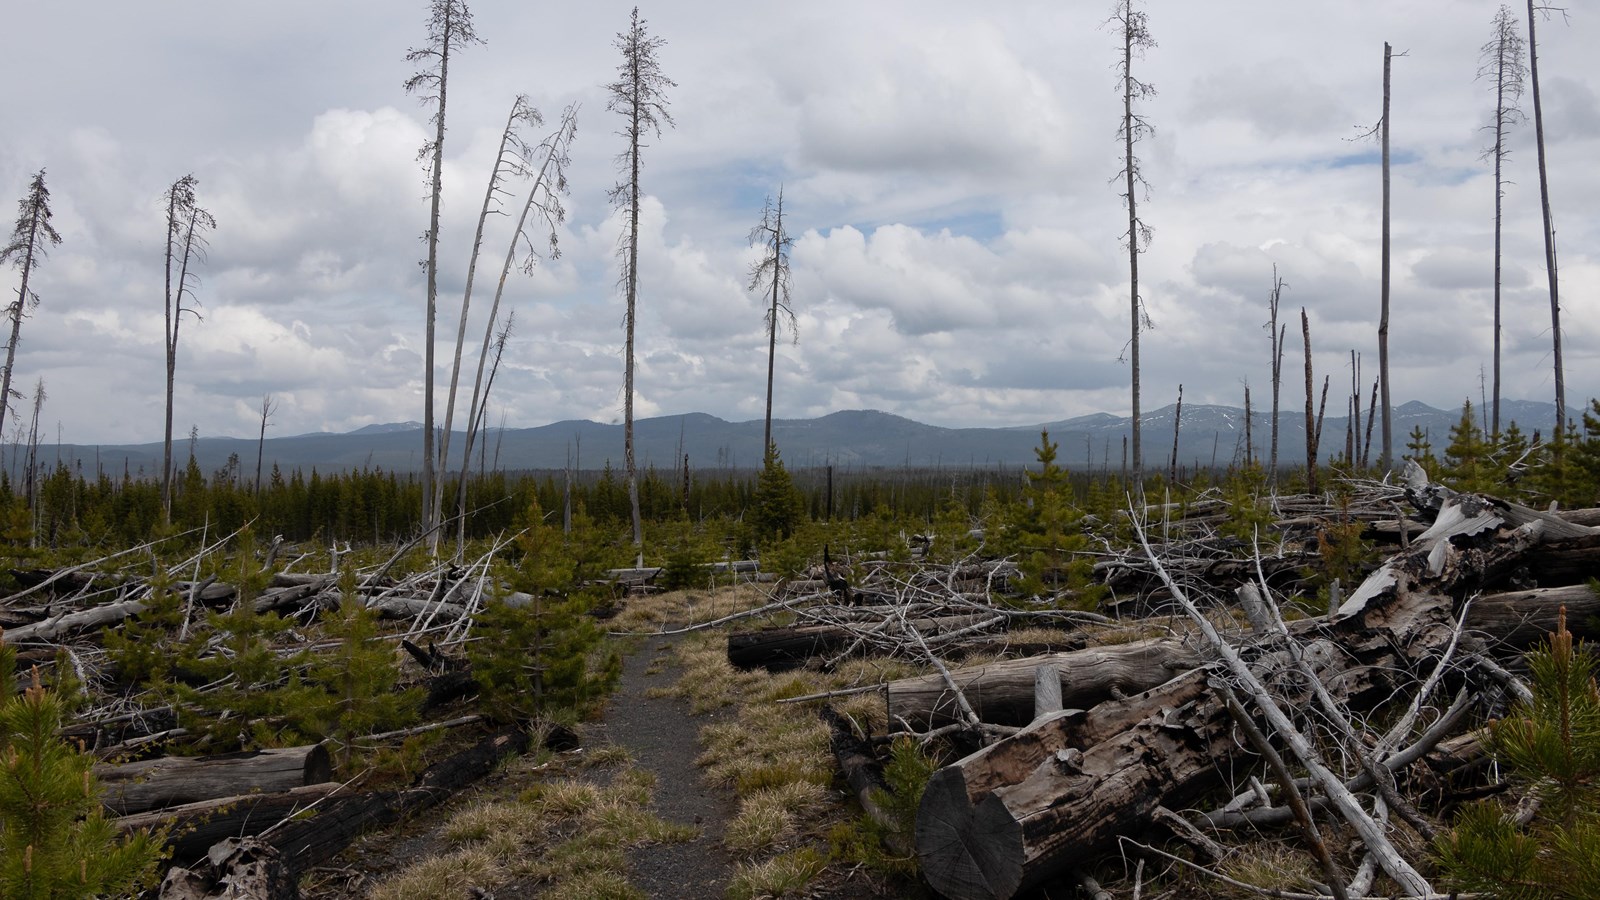 A burned area with down trees, new growth, and mountains in the distance.